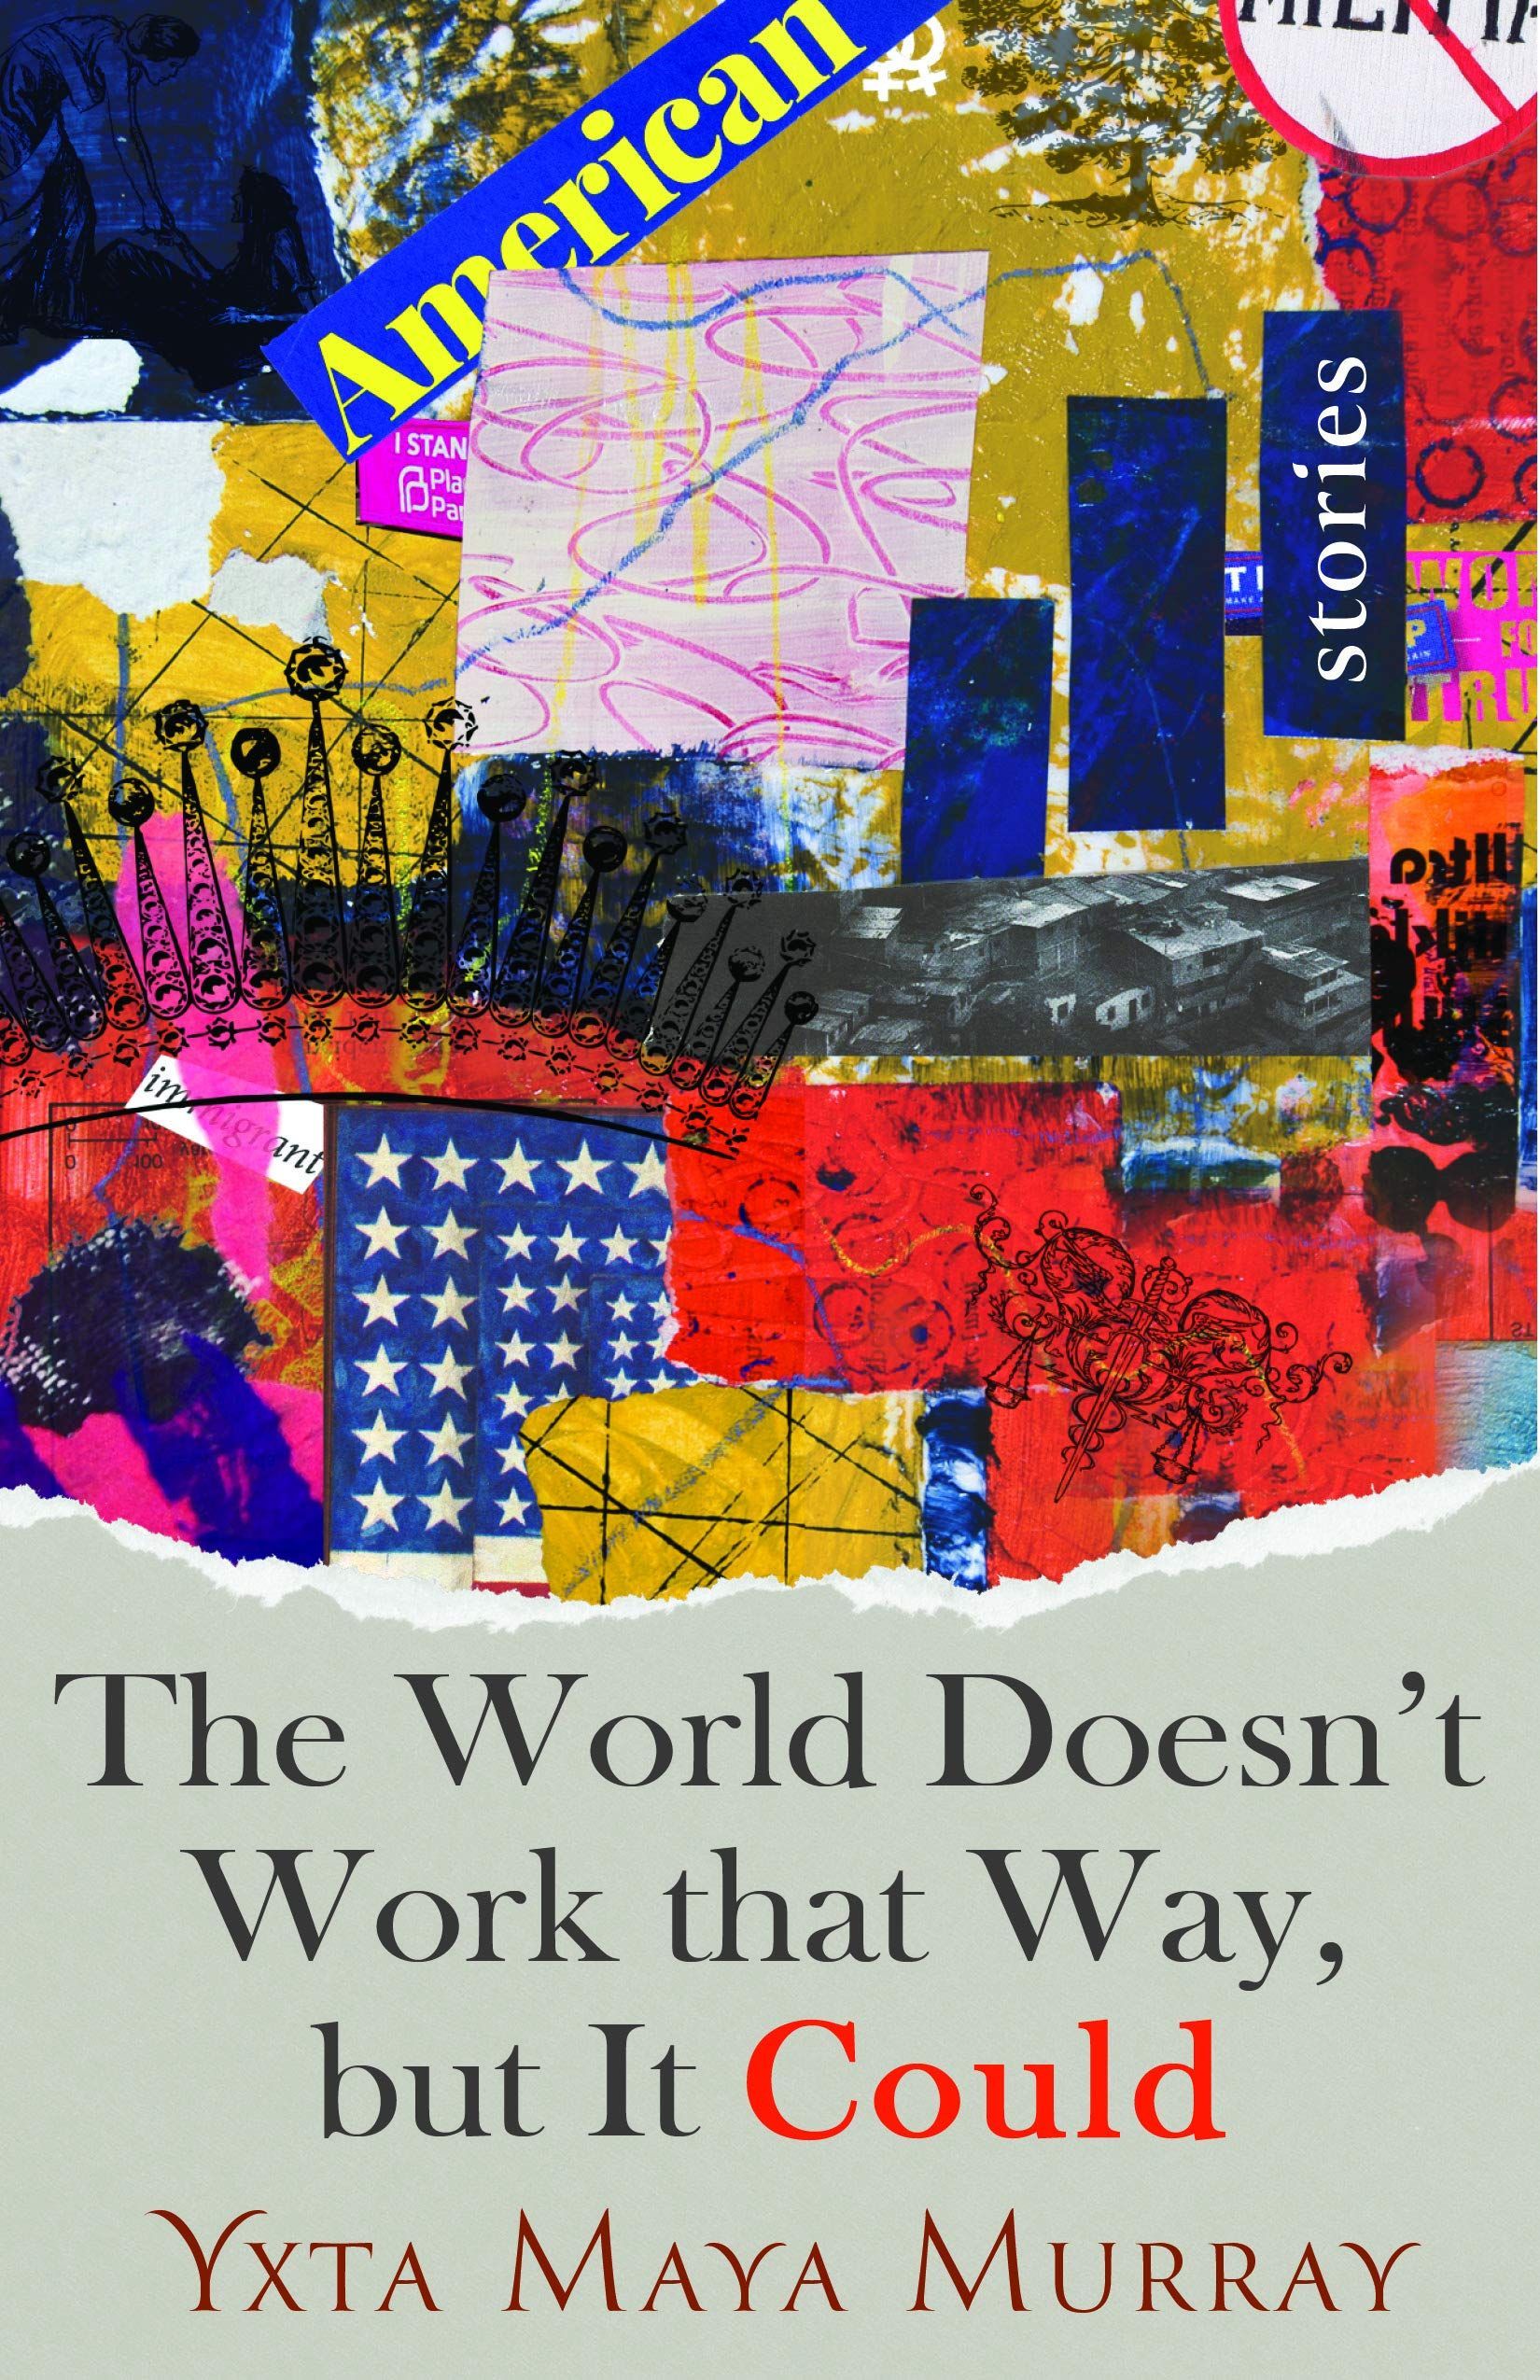 These Discomforting Truths: On Yxta Maya Murray’s “The World Doesn’t Work that Way, but It Could”